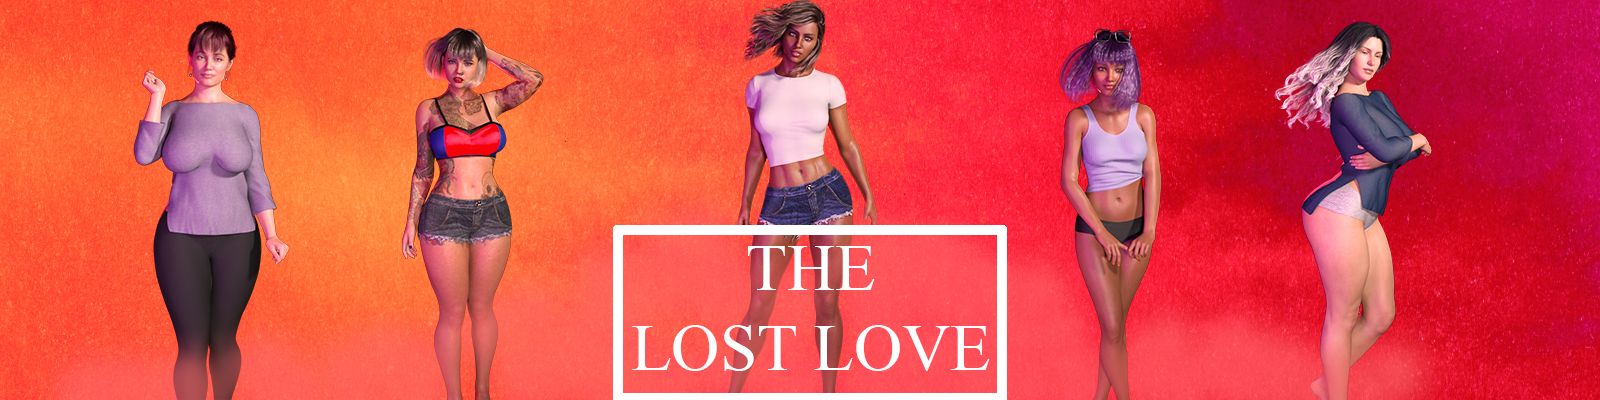 The Lost Love Apk Android Adult Game Download (11)